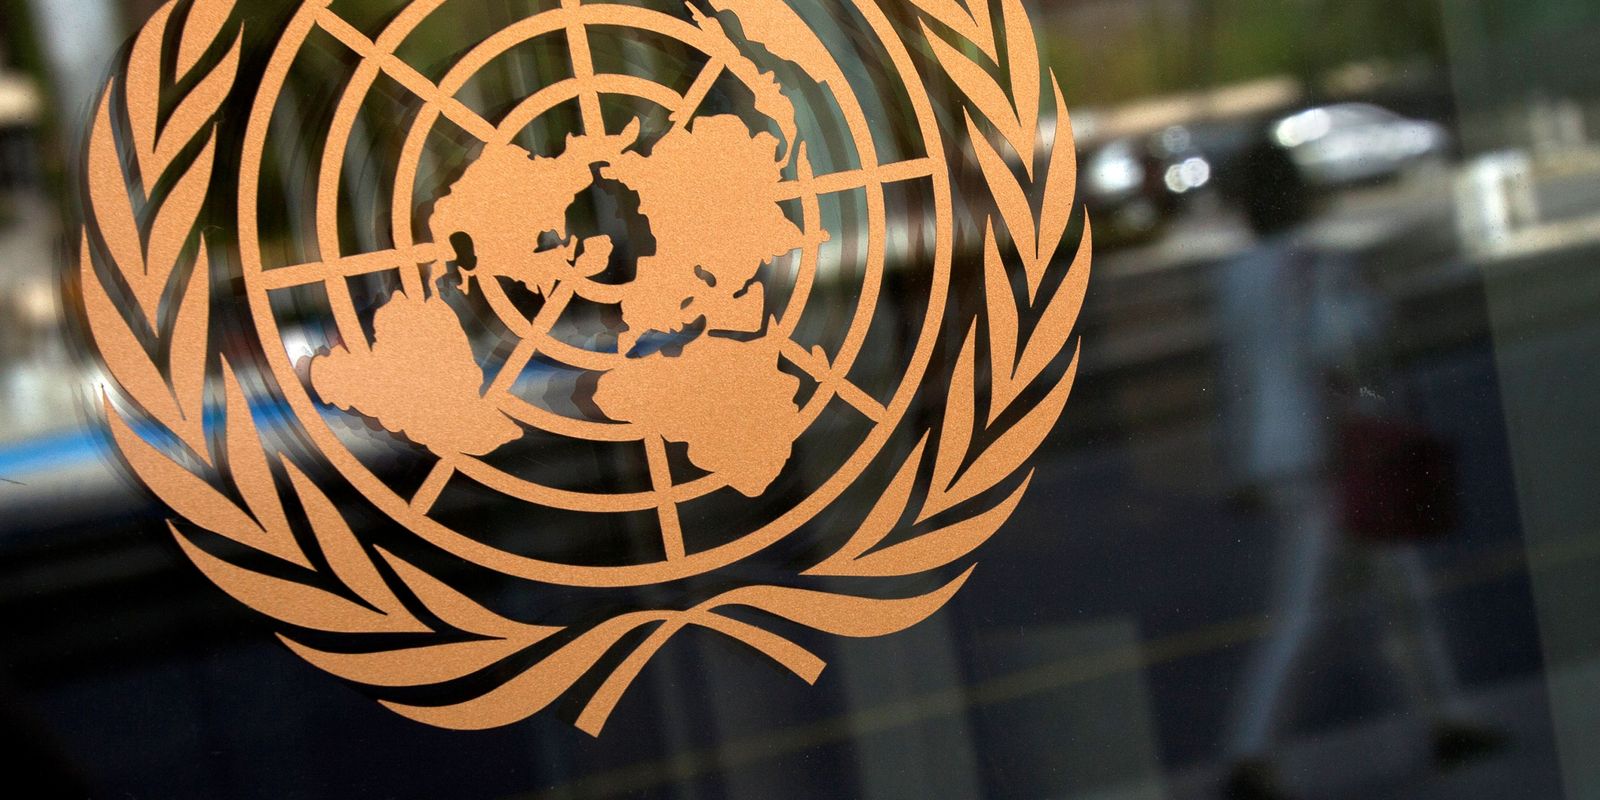 FILE PHOTO: The logo of the United Nations is seen on the outside of its headquarters in New York